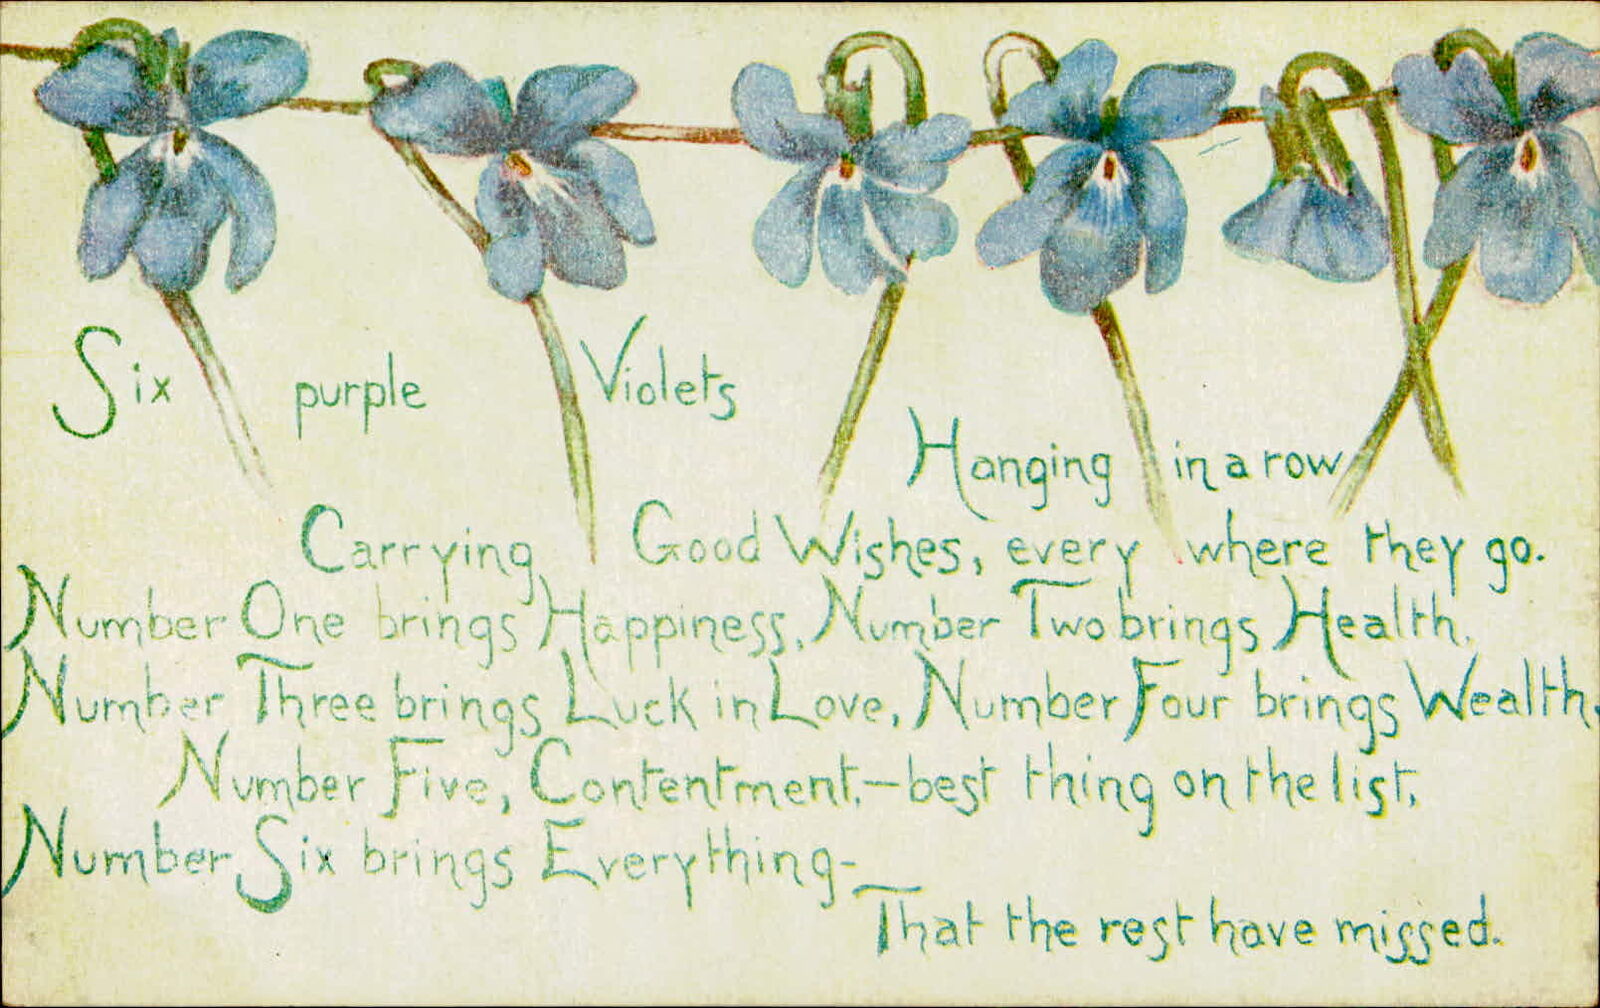 Postcard: Six purple Violets Hanging in a row Carrying Good Wishes, ev